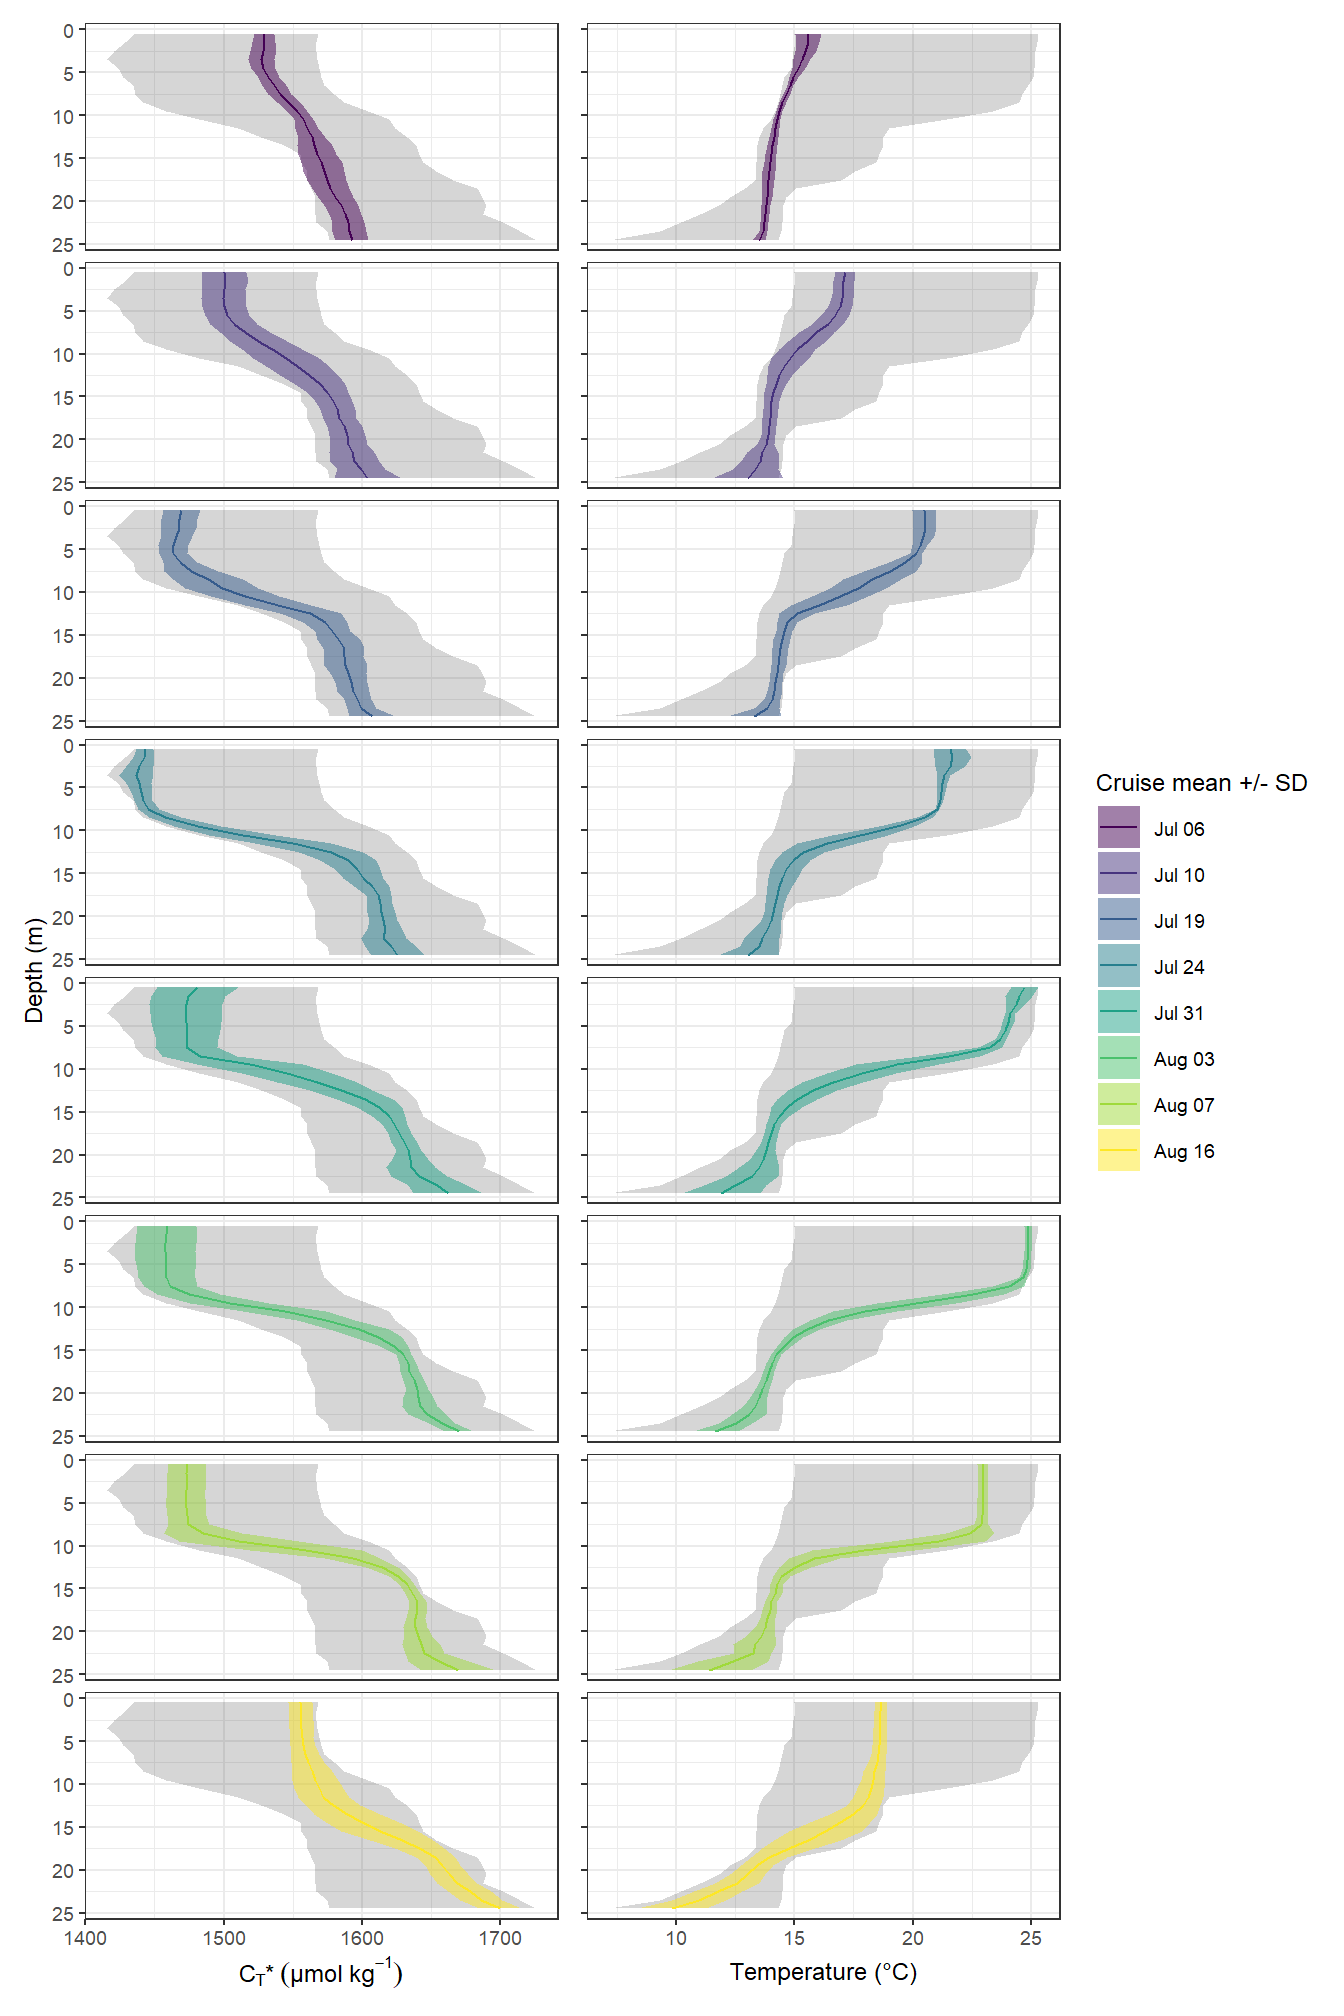 Mean vertical profiles per cruise day across all stations plotted indivdually. Ribbons indicate the standard deviation observed across all profiles at each depth and transect.